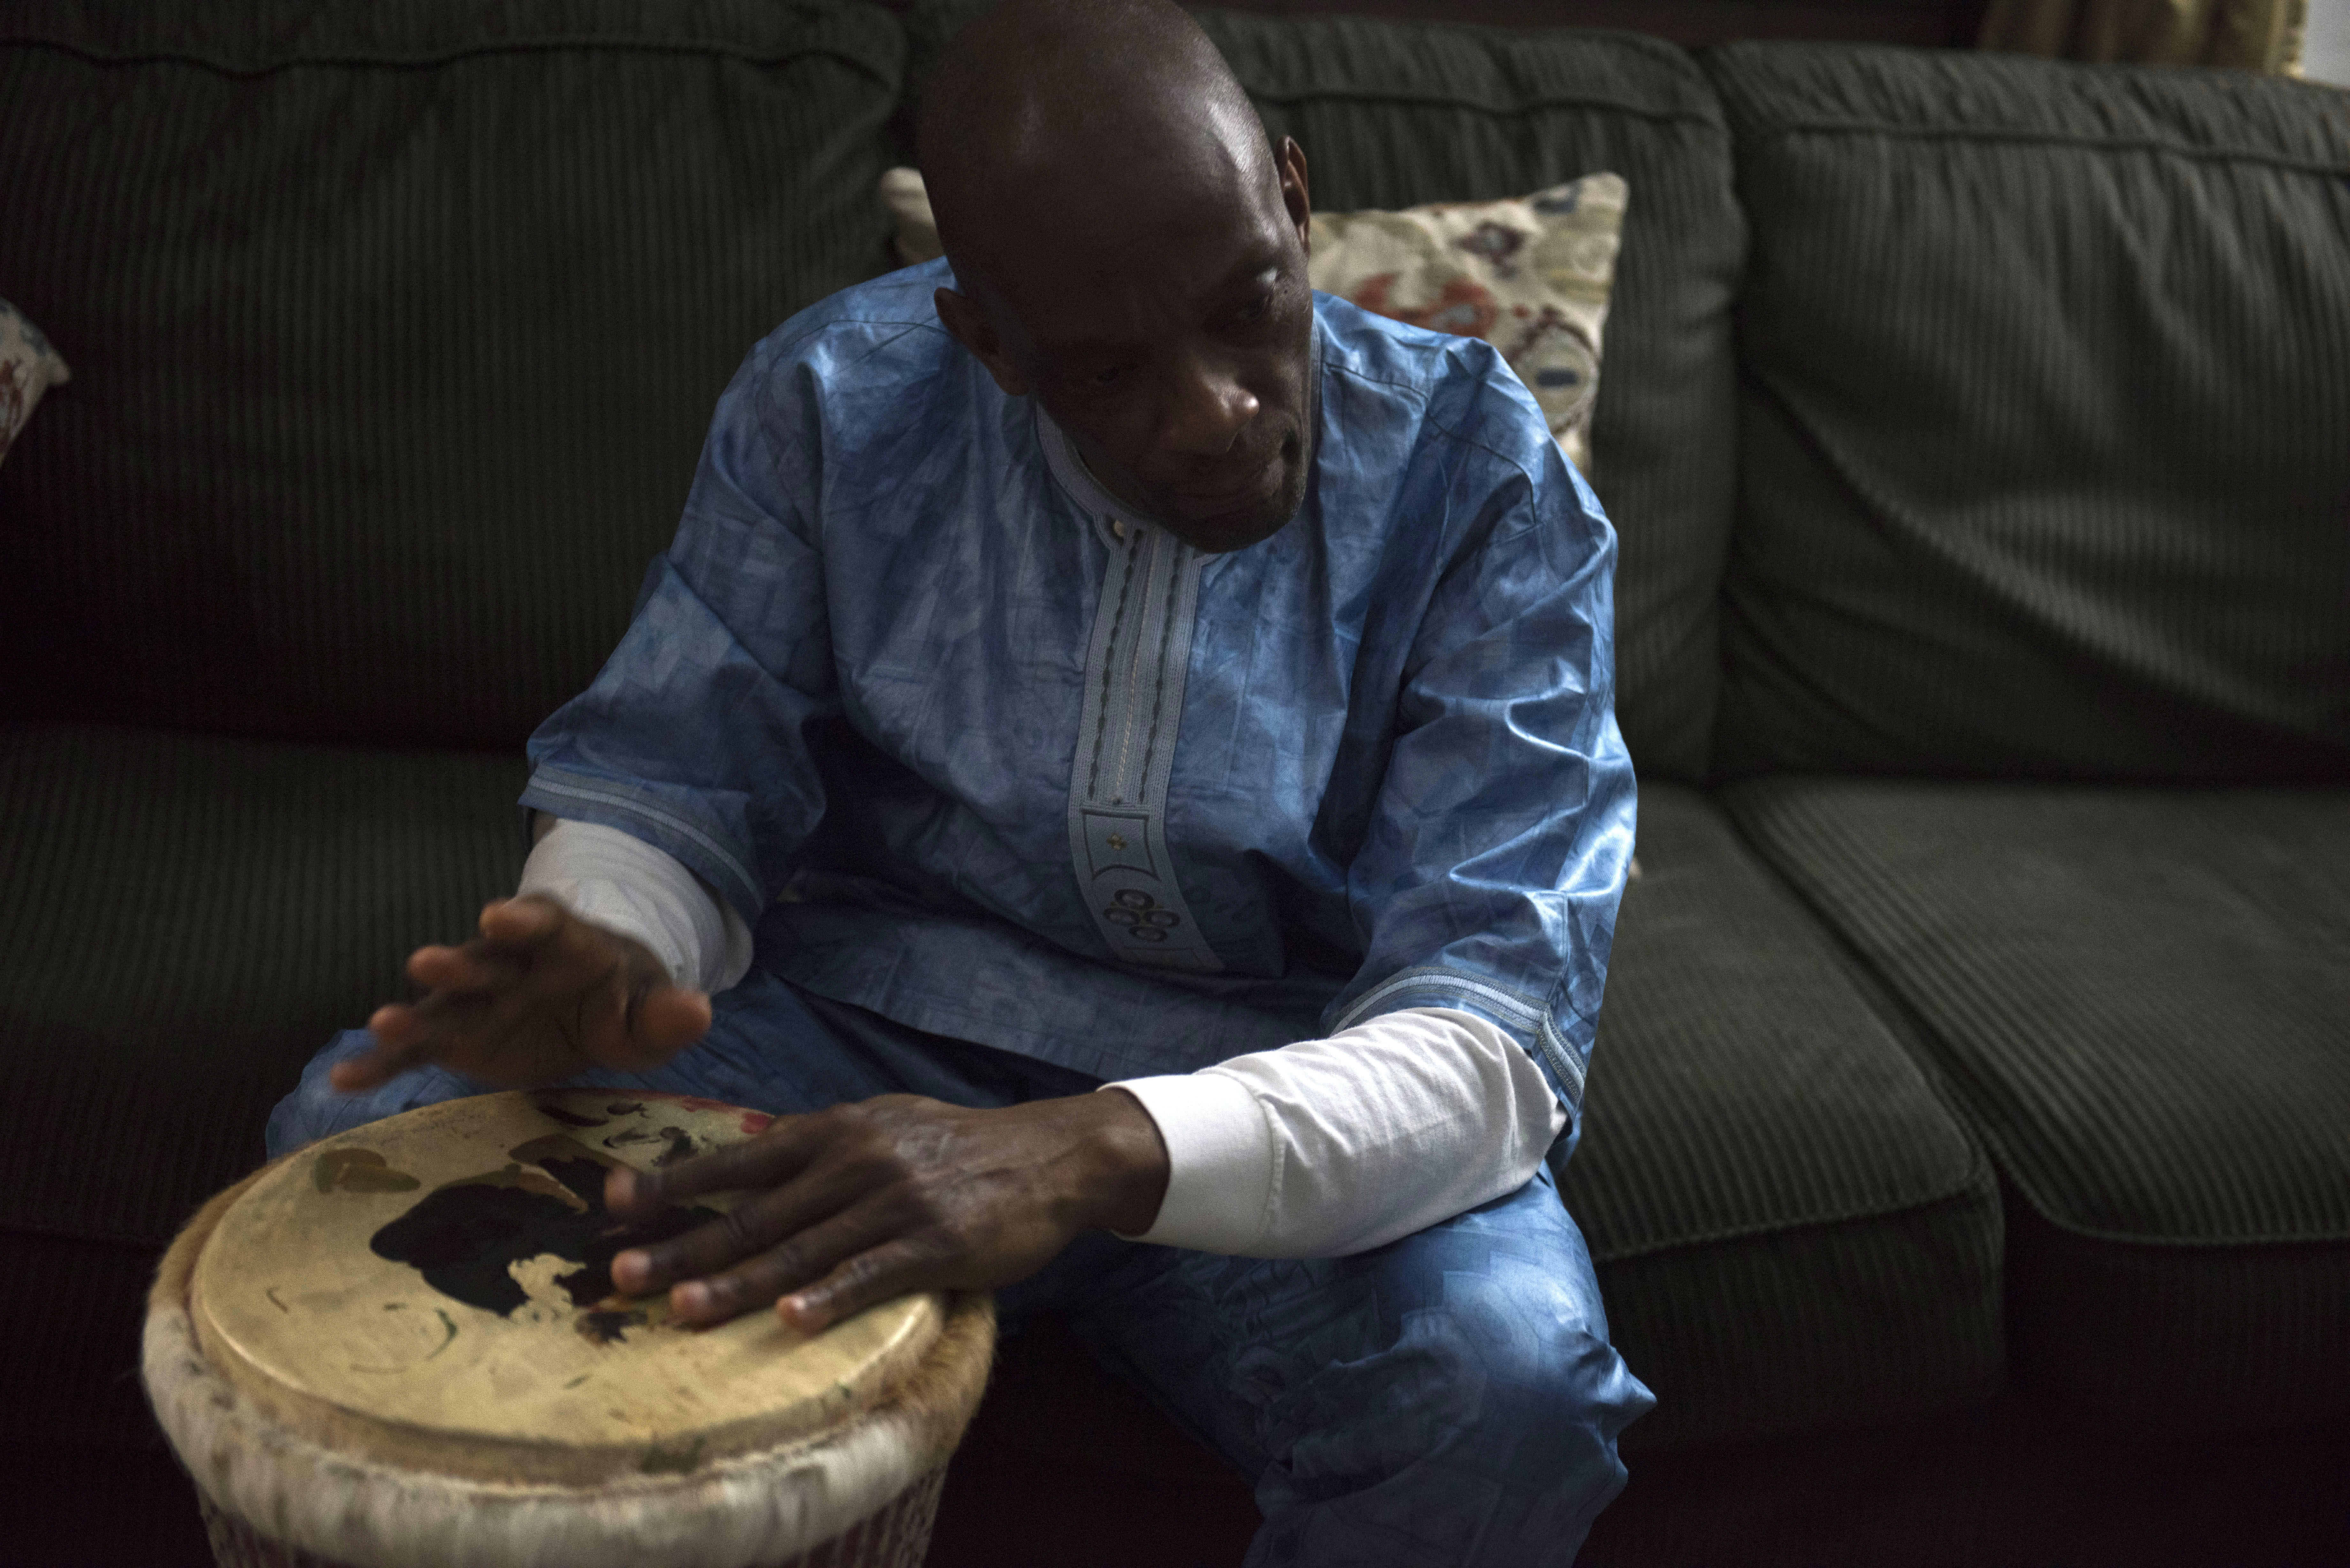 Tamba playing the djembe, one of West Africa's best known music instruments.